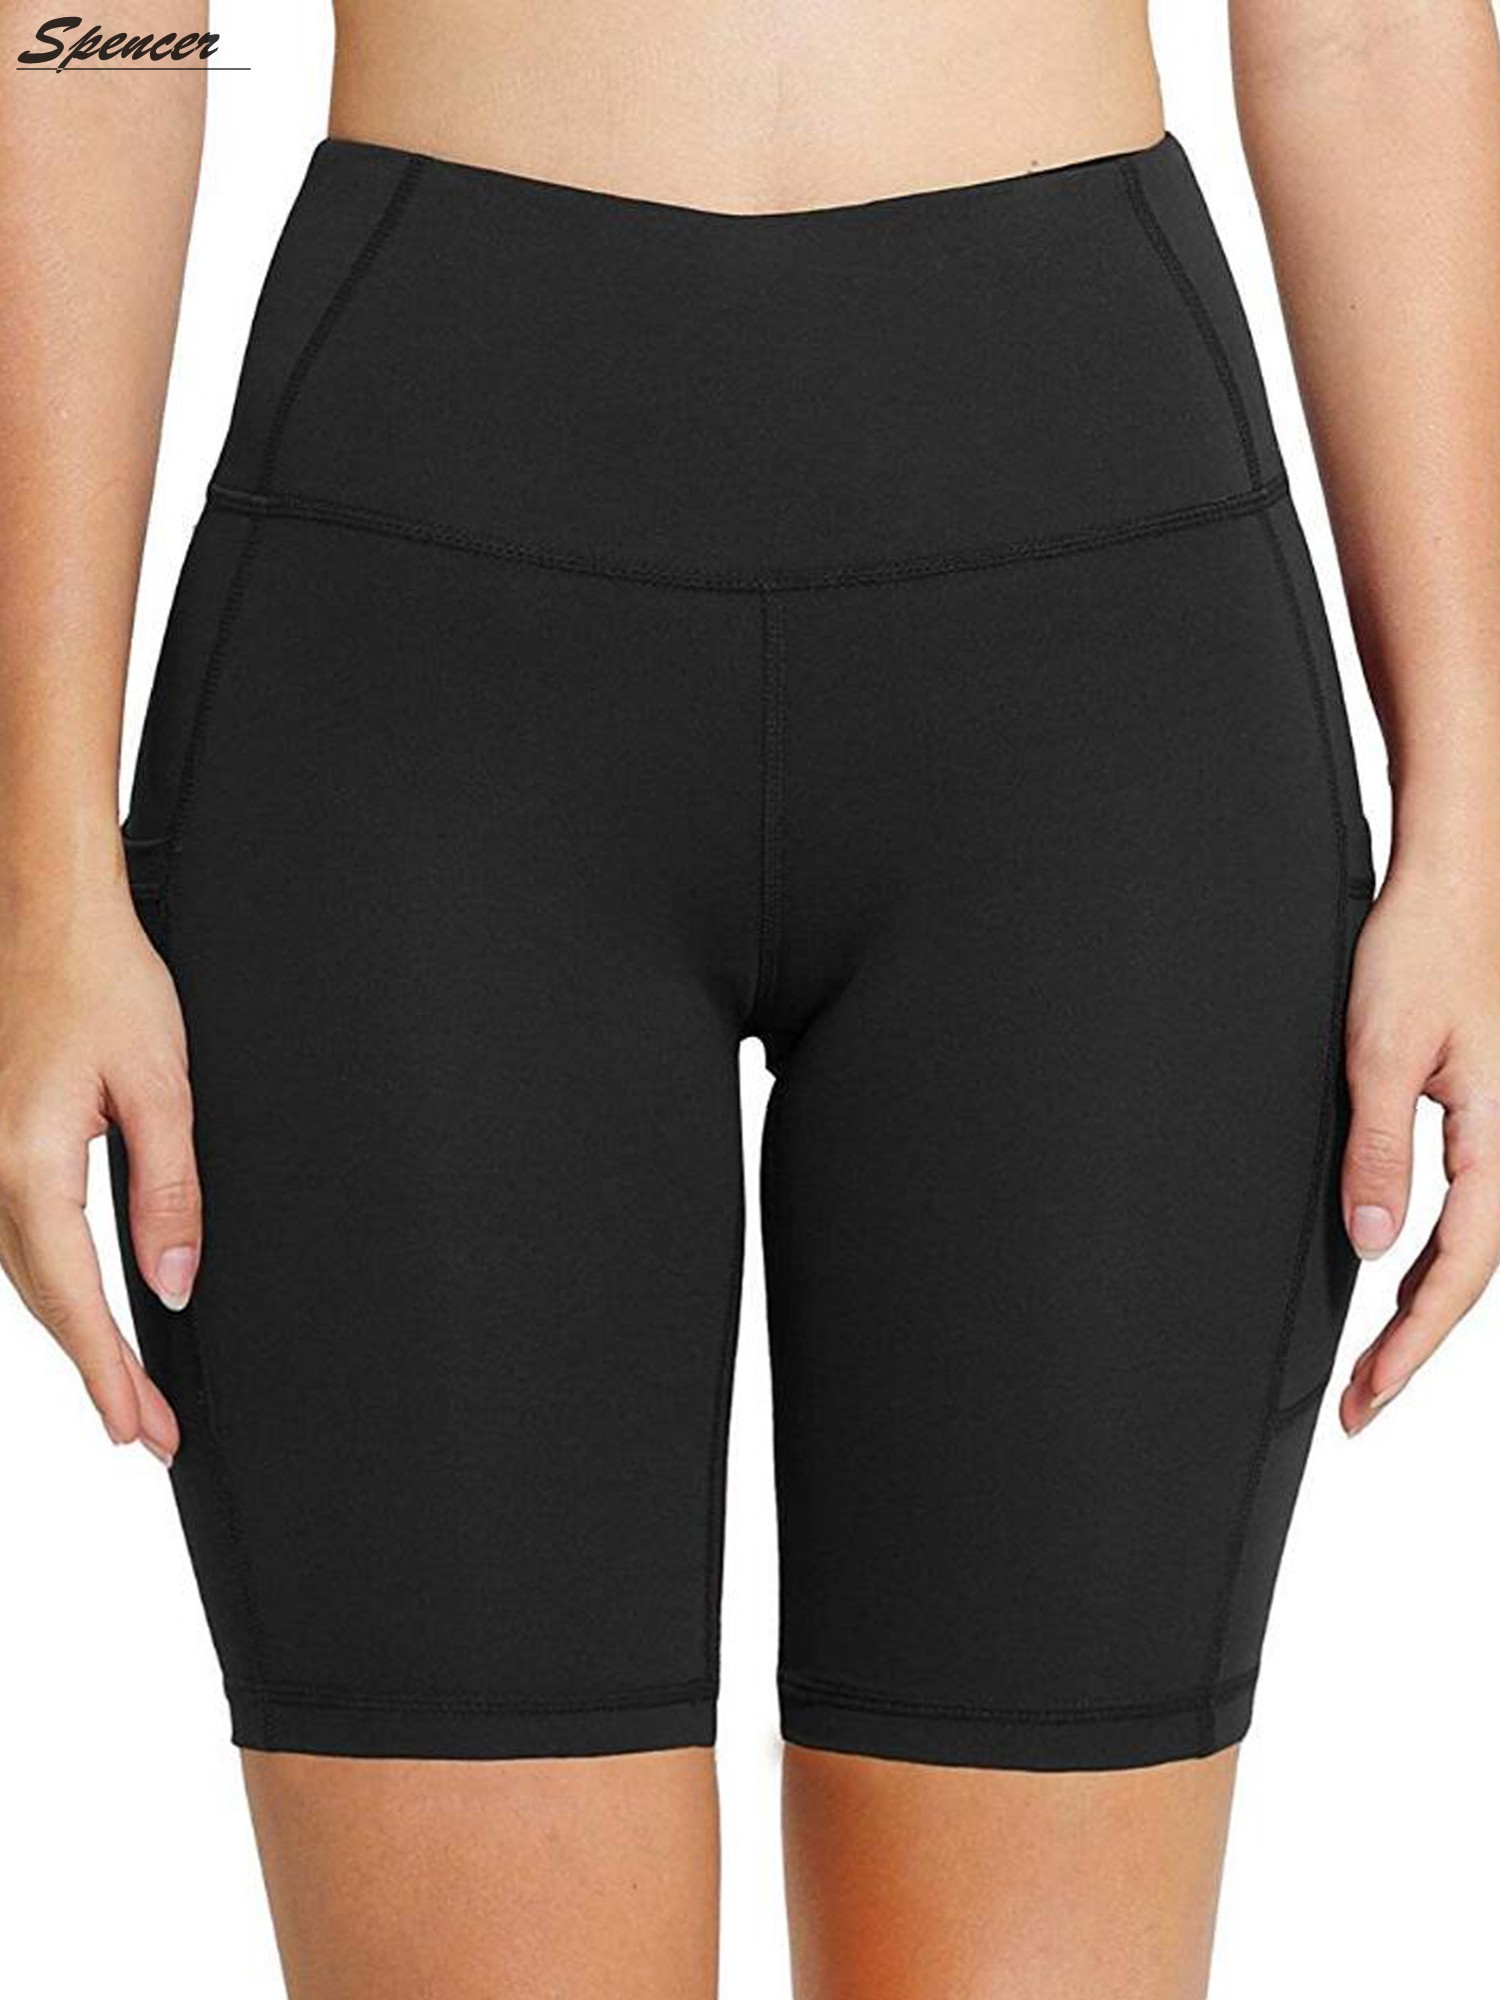 Spencer Womens High Waist Yoga Shorts with Side Pockets Tummy Control Workout 4 Way Stretch Yoga Leggings "M, Black" - image 4 of 9